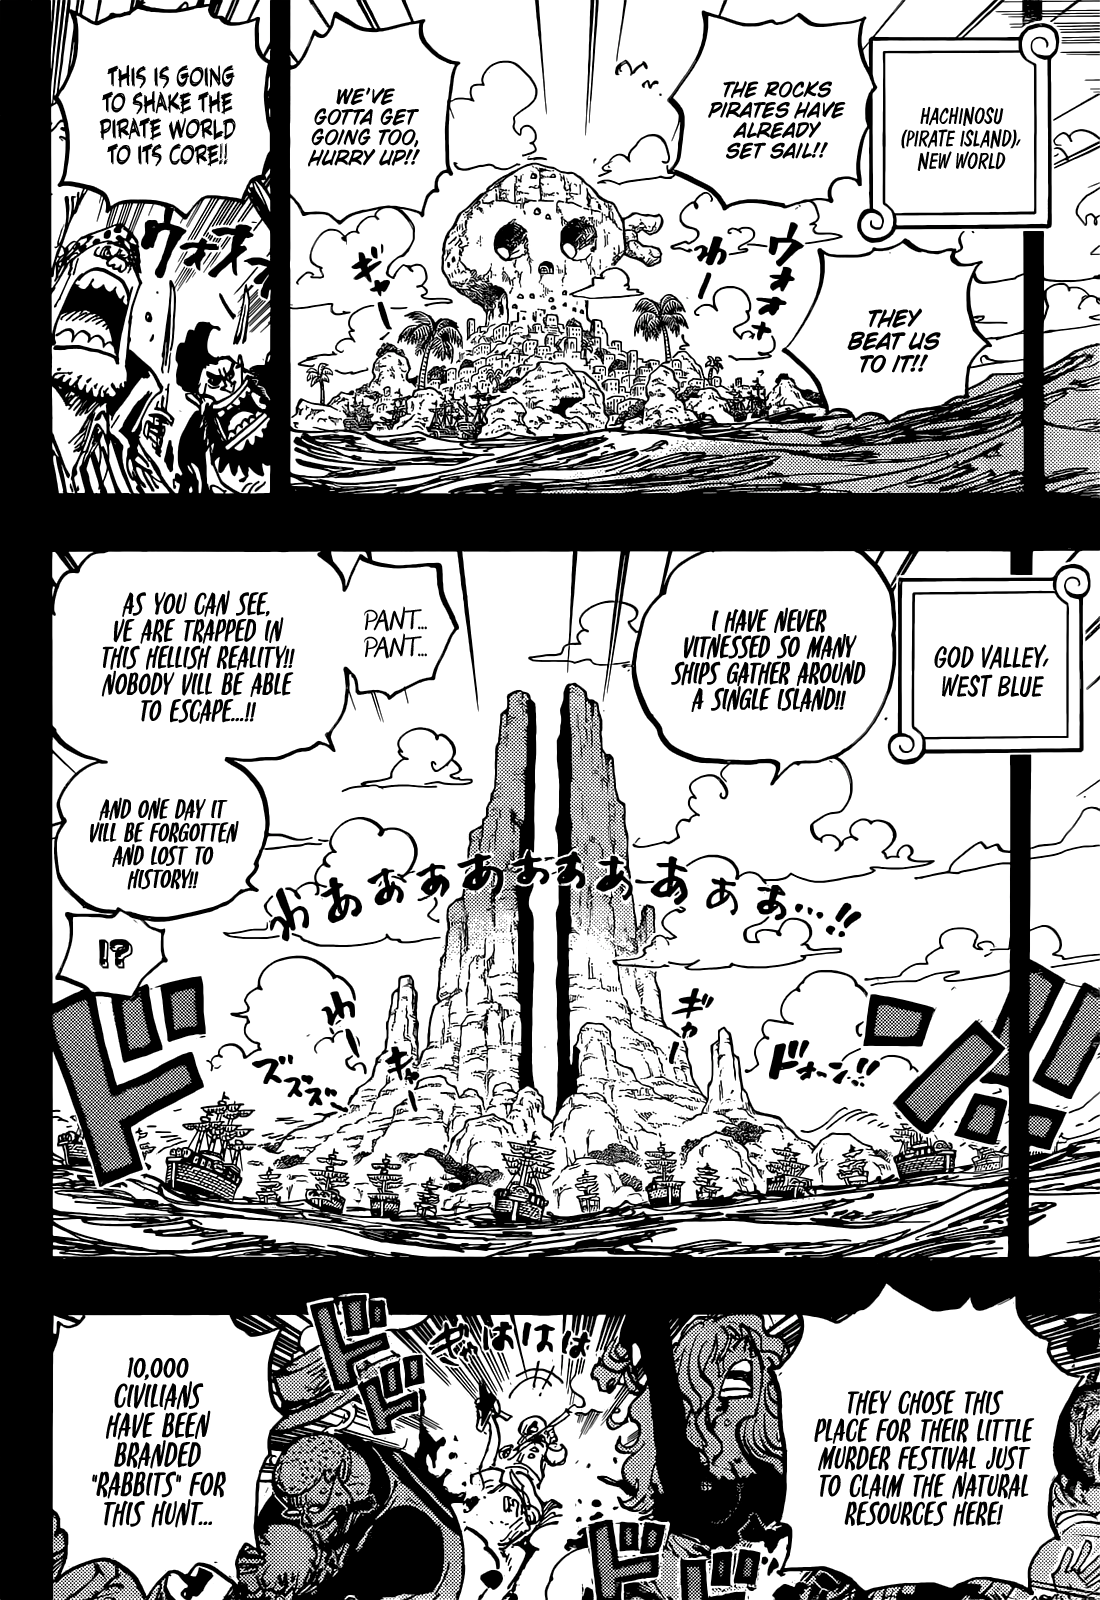 Spoiler - Spoiler One Piece Chapter 1057 Spoilers Discussion, Page 458